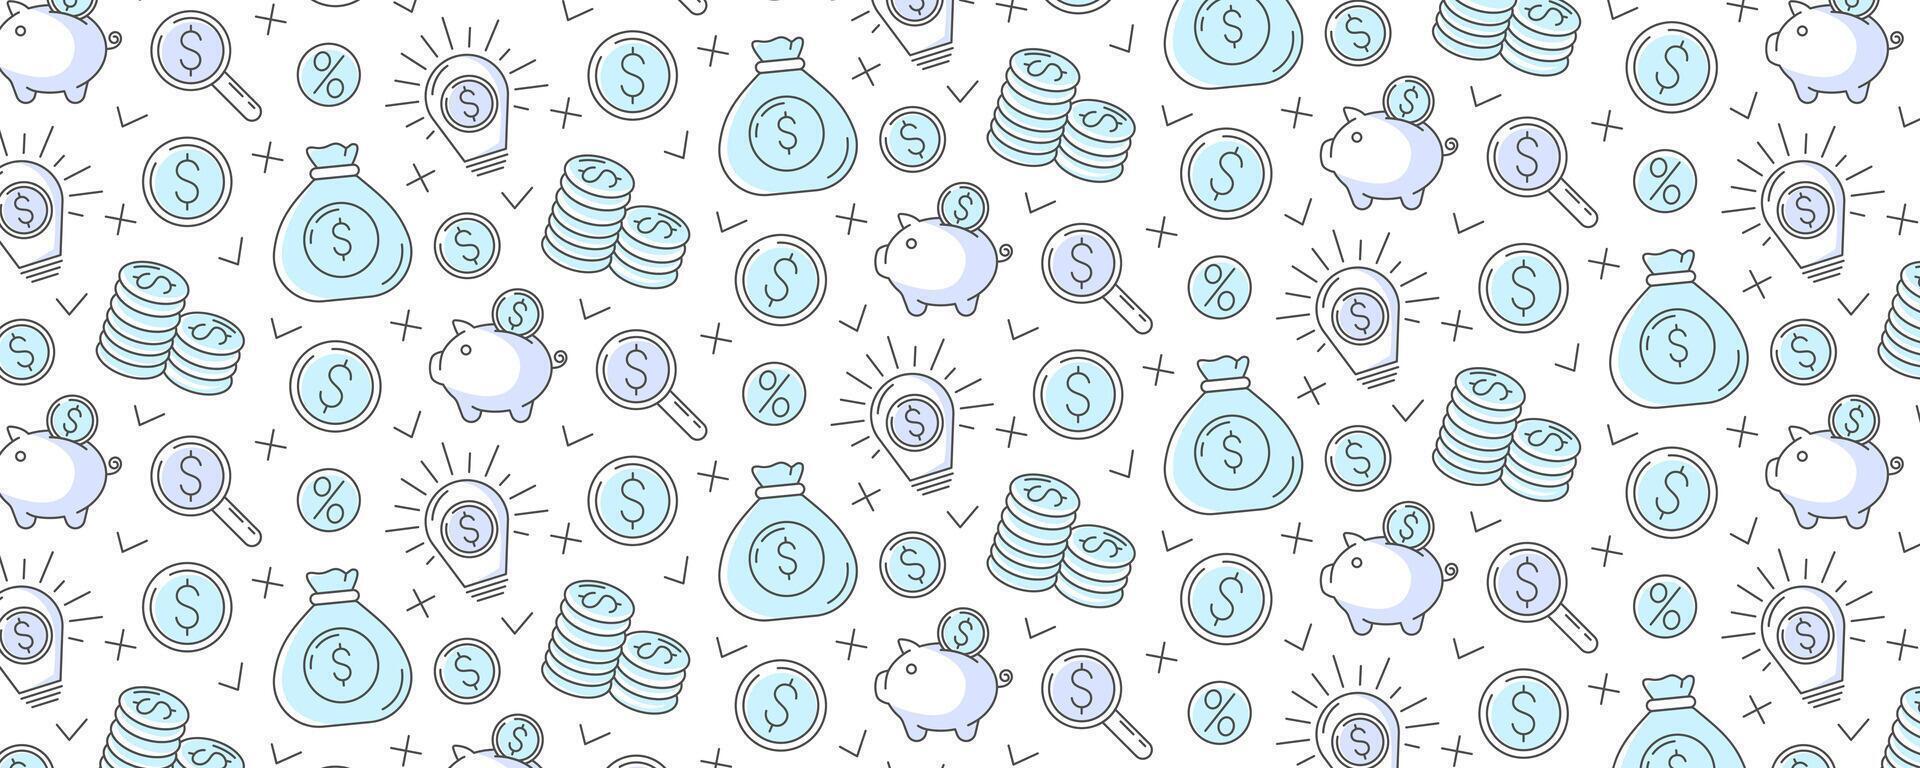 Business and finance seamless pattern with flat blue line icons of piggy bank, stack of coins, dollar sign, magnifying glass, money bag, light bulb with money idea. For cover, wrapping paper vector